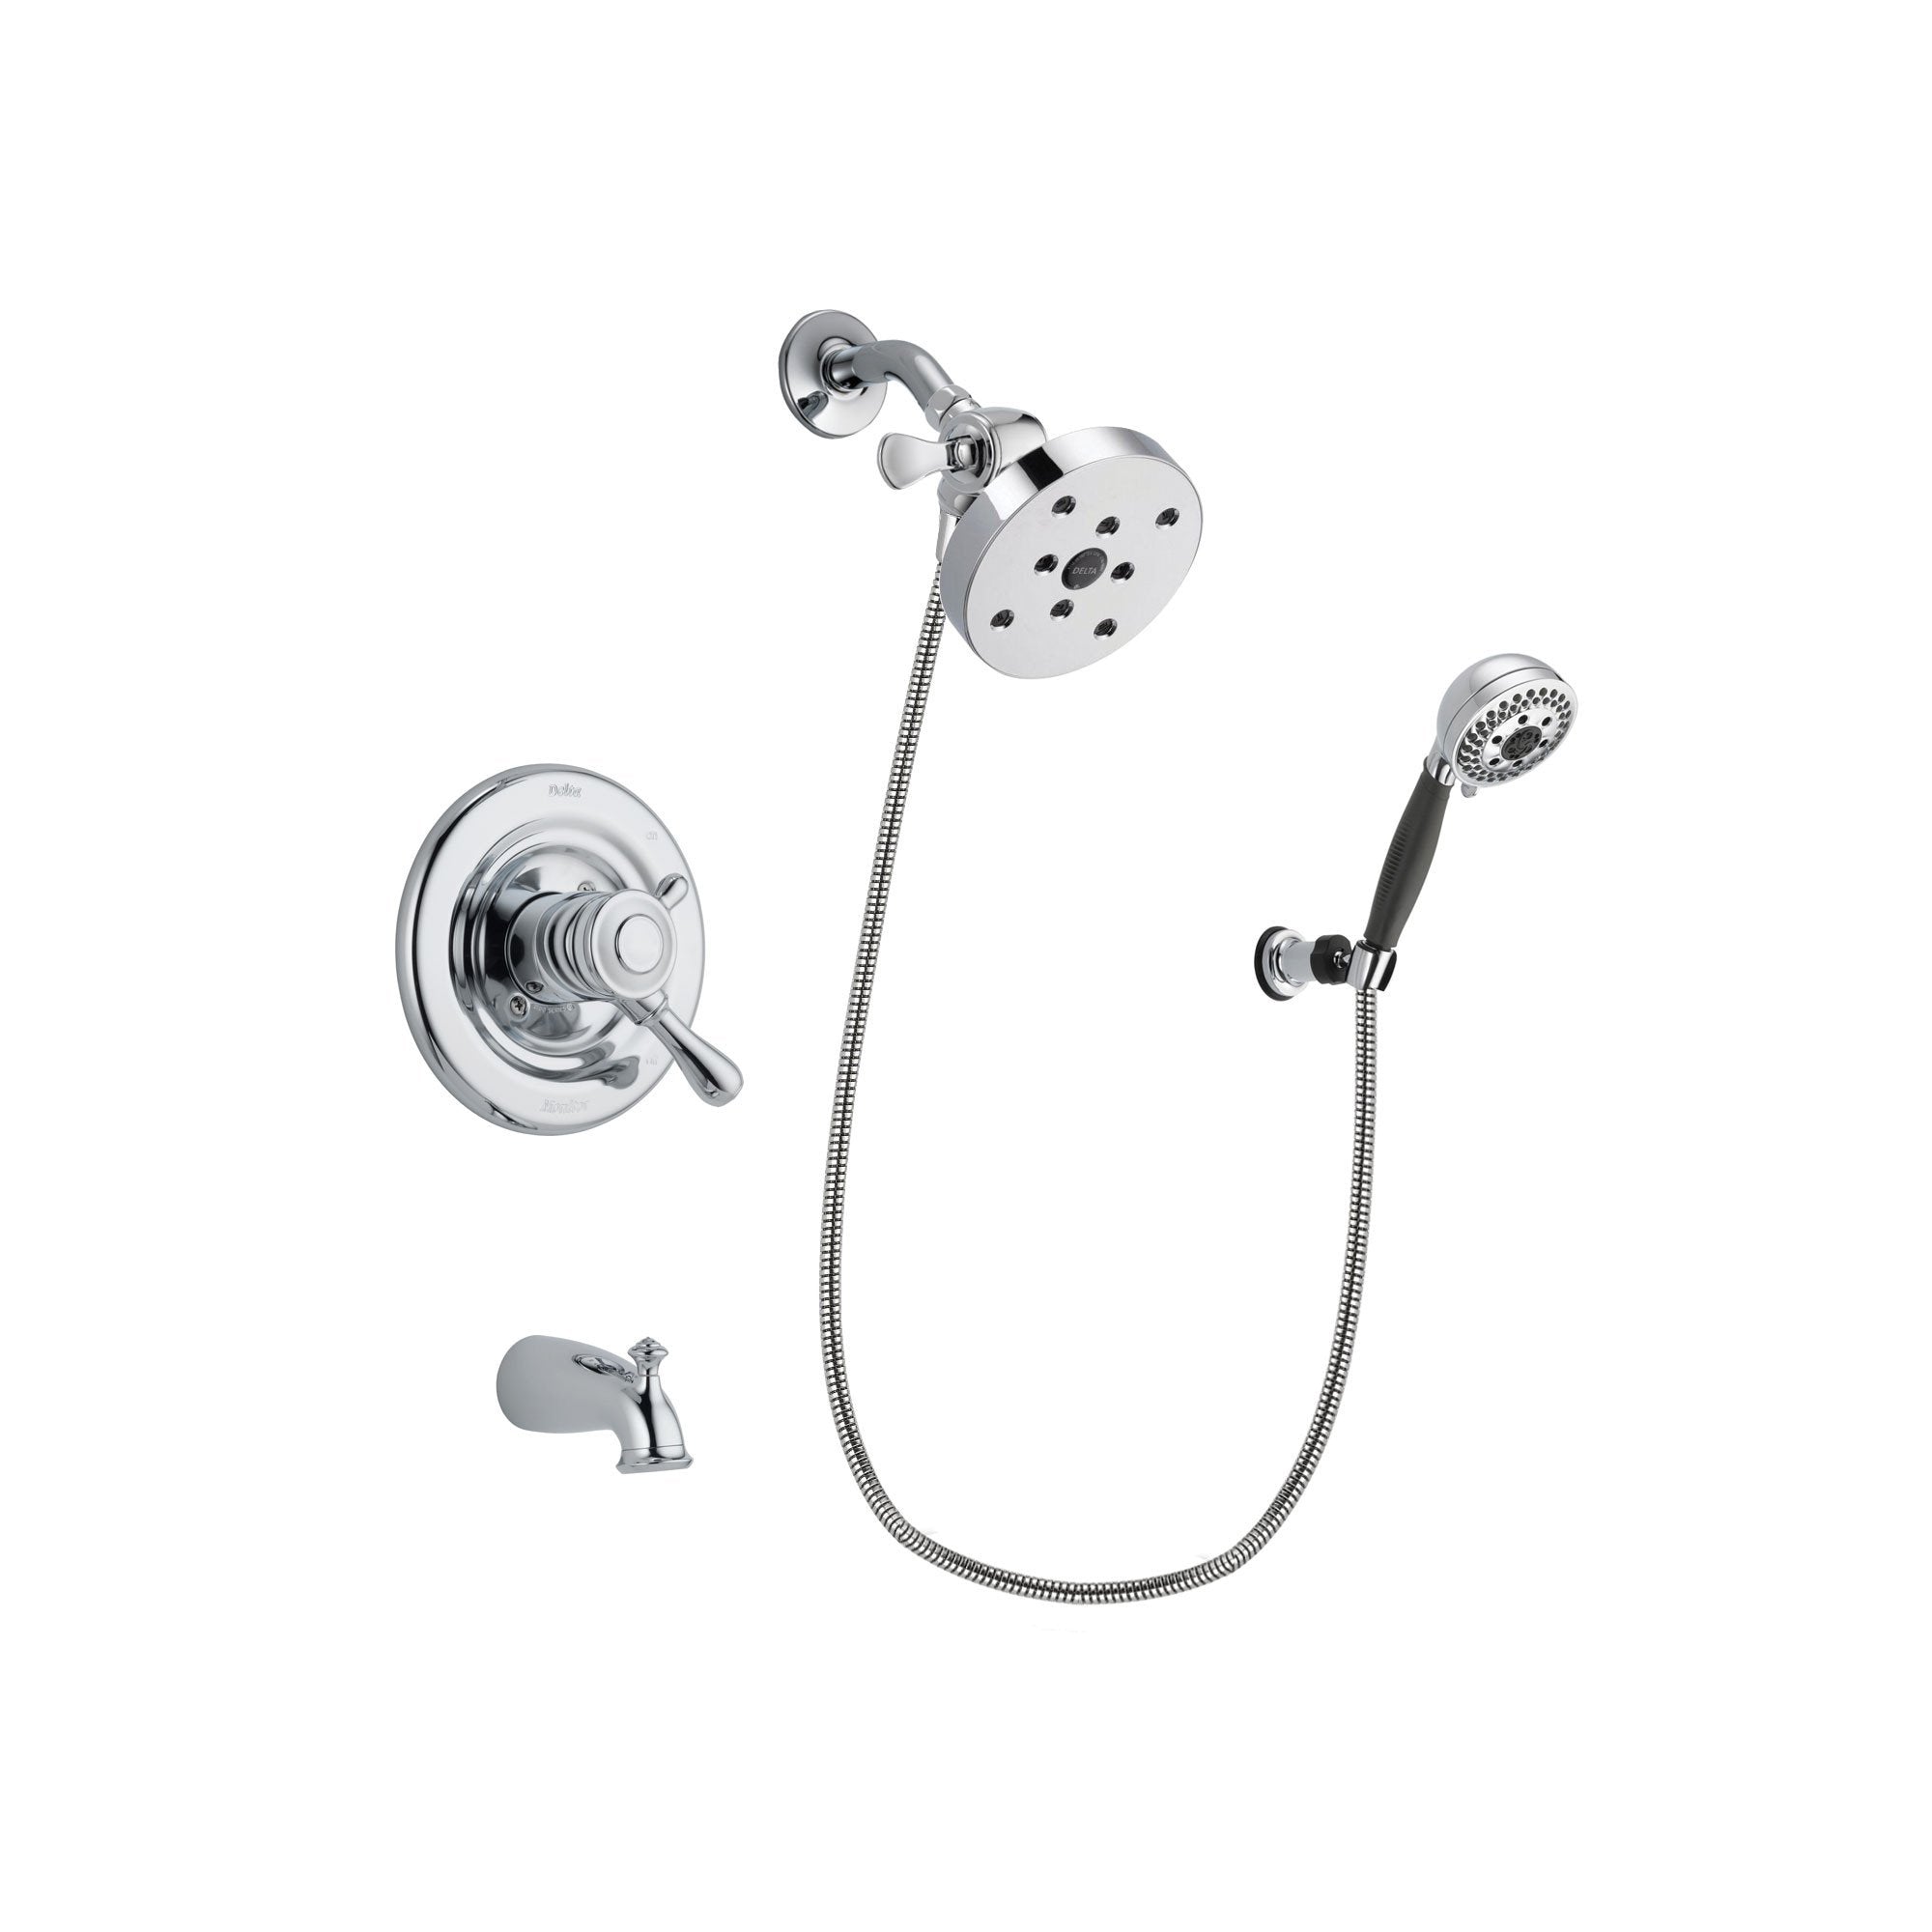 Delta Leland Chrome Finish Dual Control Tub and Shower Faucet System Package with 5-1/2 inch Shower Head and 5-Spray Modern Handheld Shower with Wall Bracket and Hose Includes Rough-in Valve and Tub Spout DSP1233V